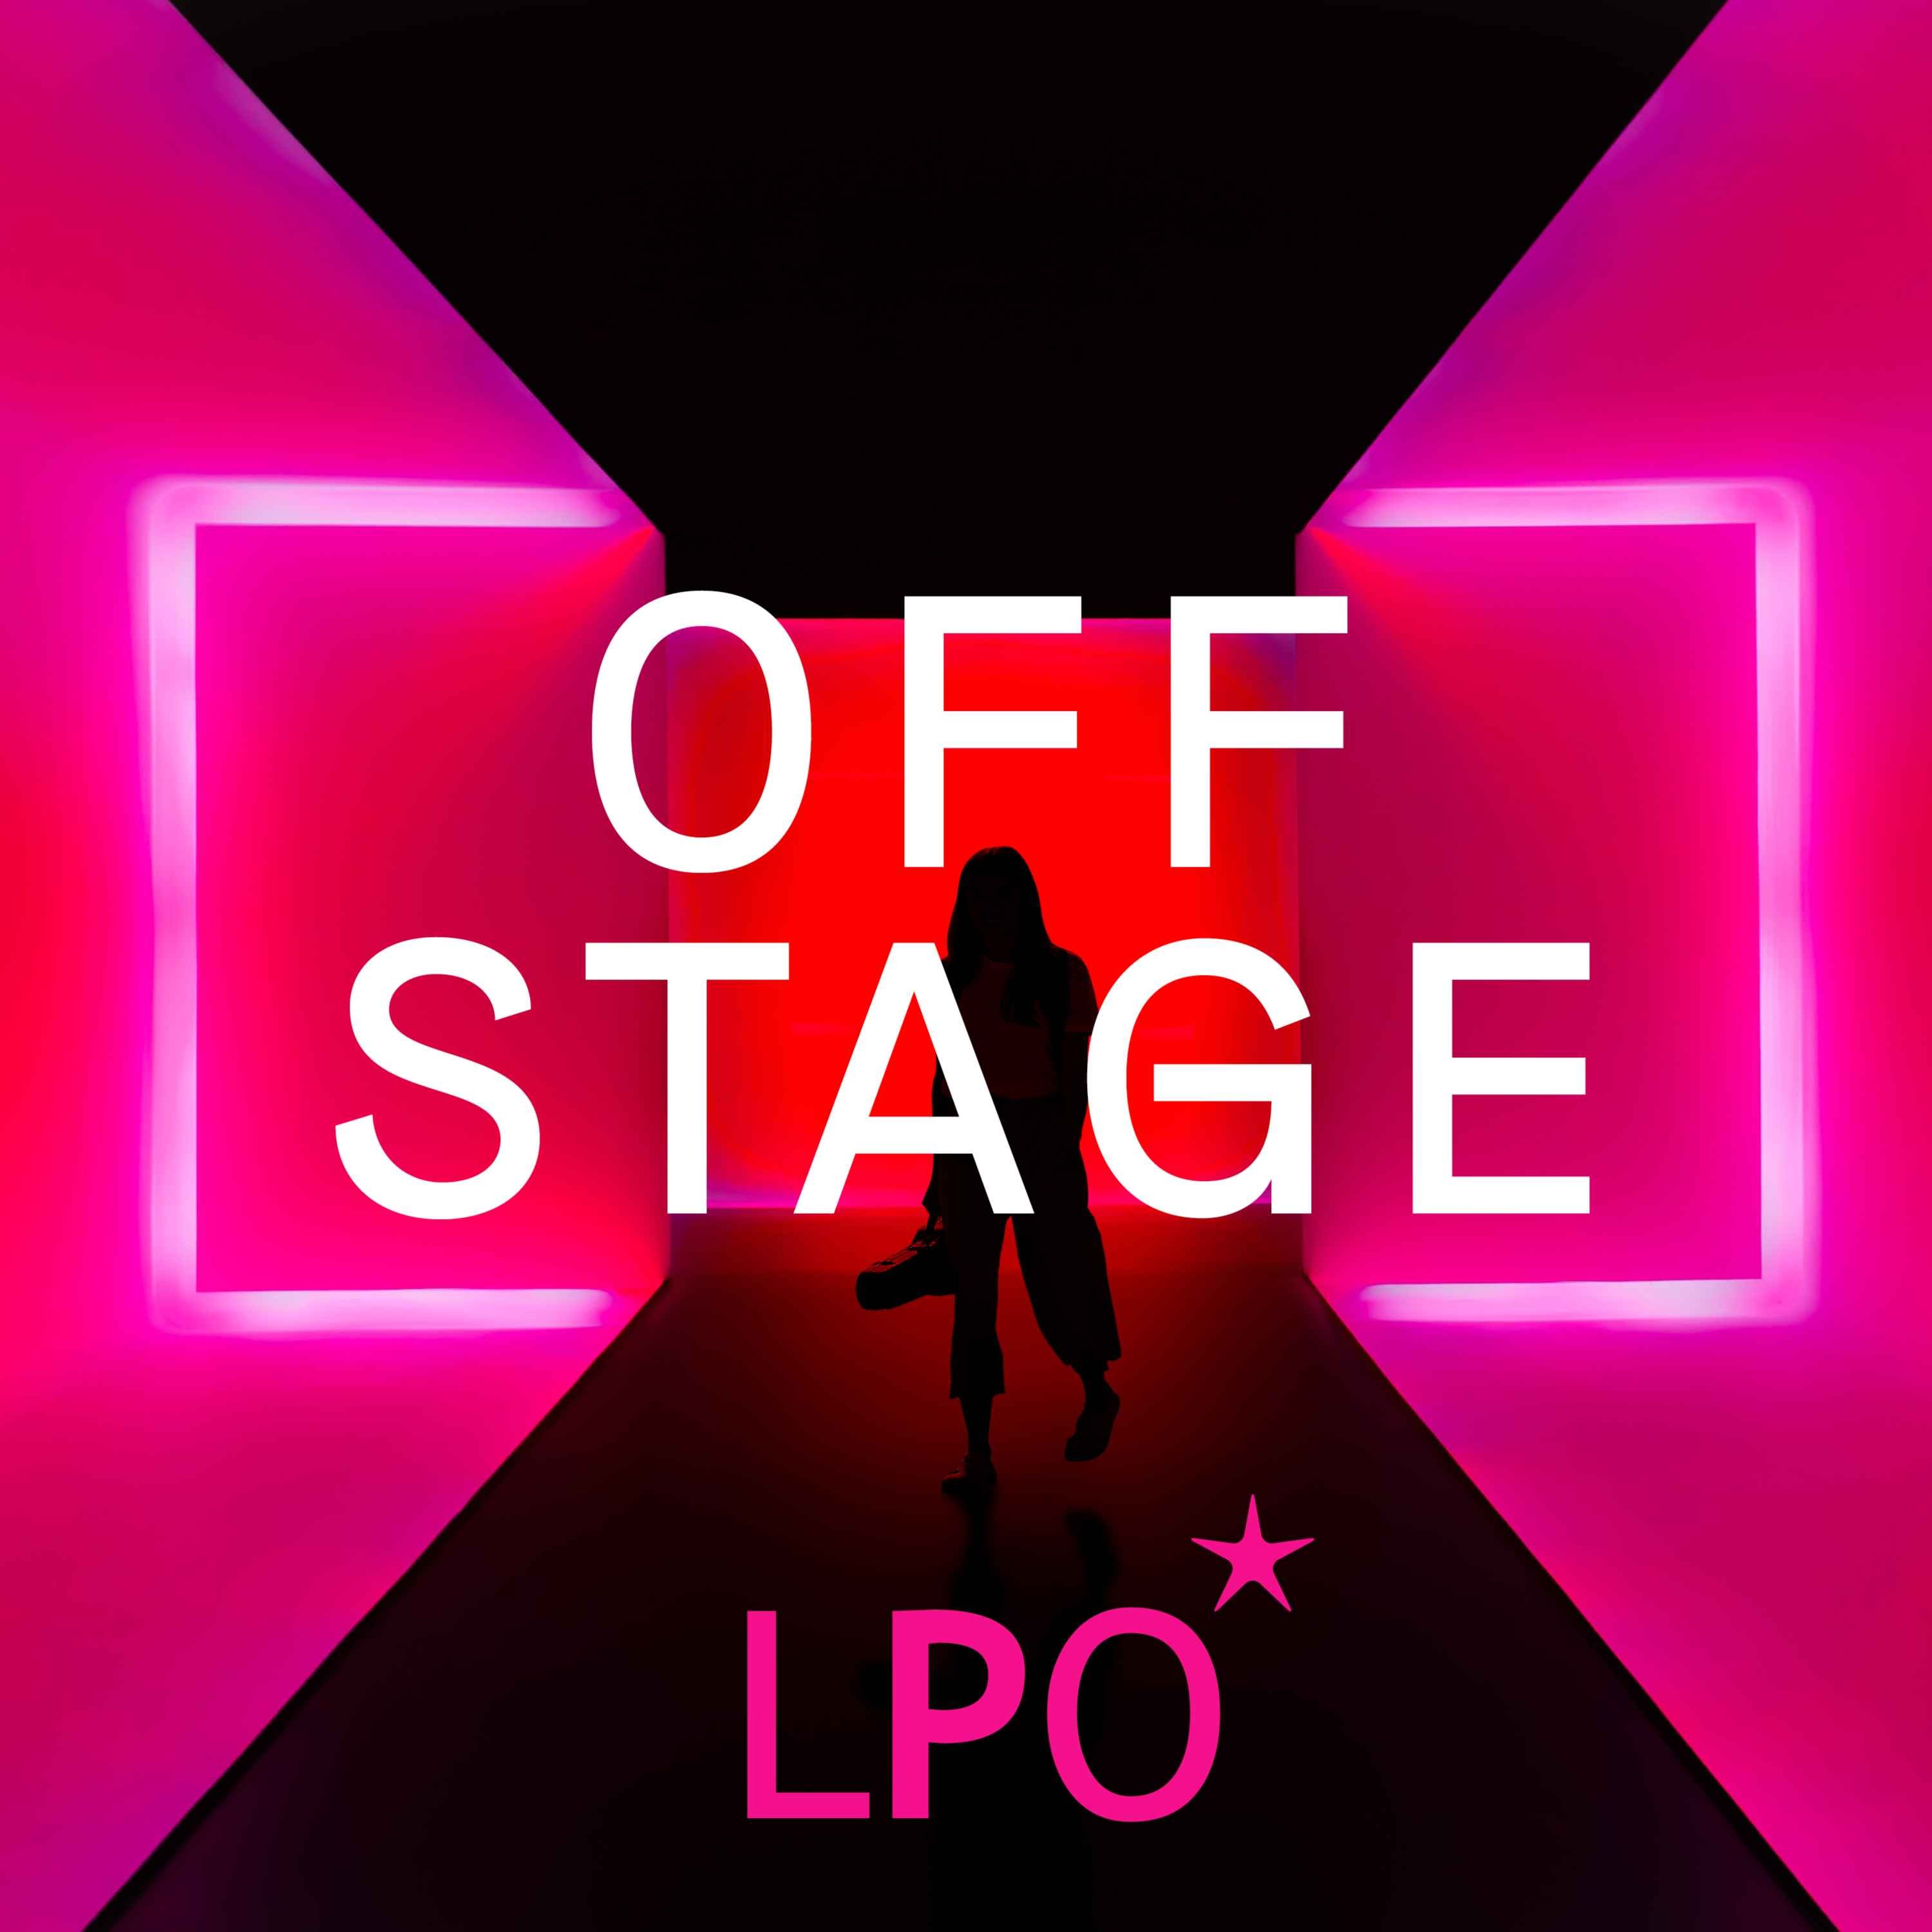 Welcome to LPO Offstage with YolanDa Brown